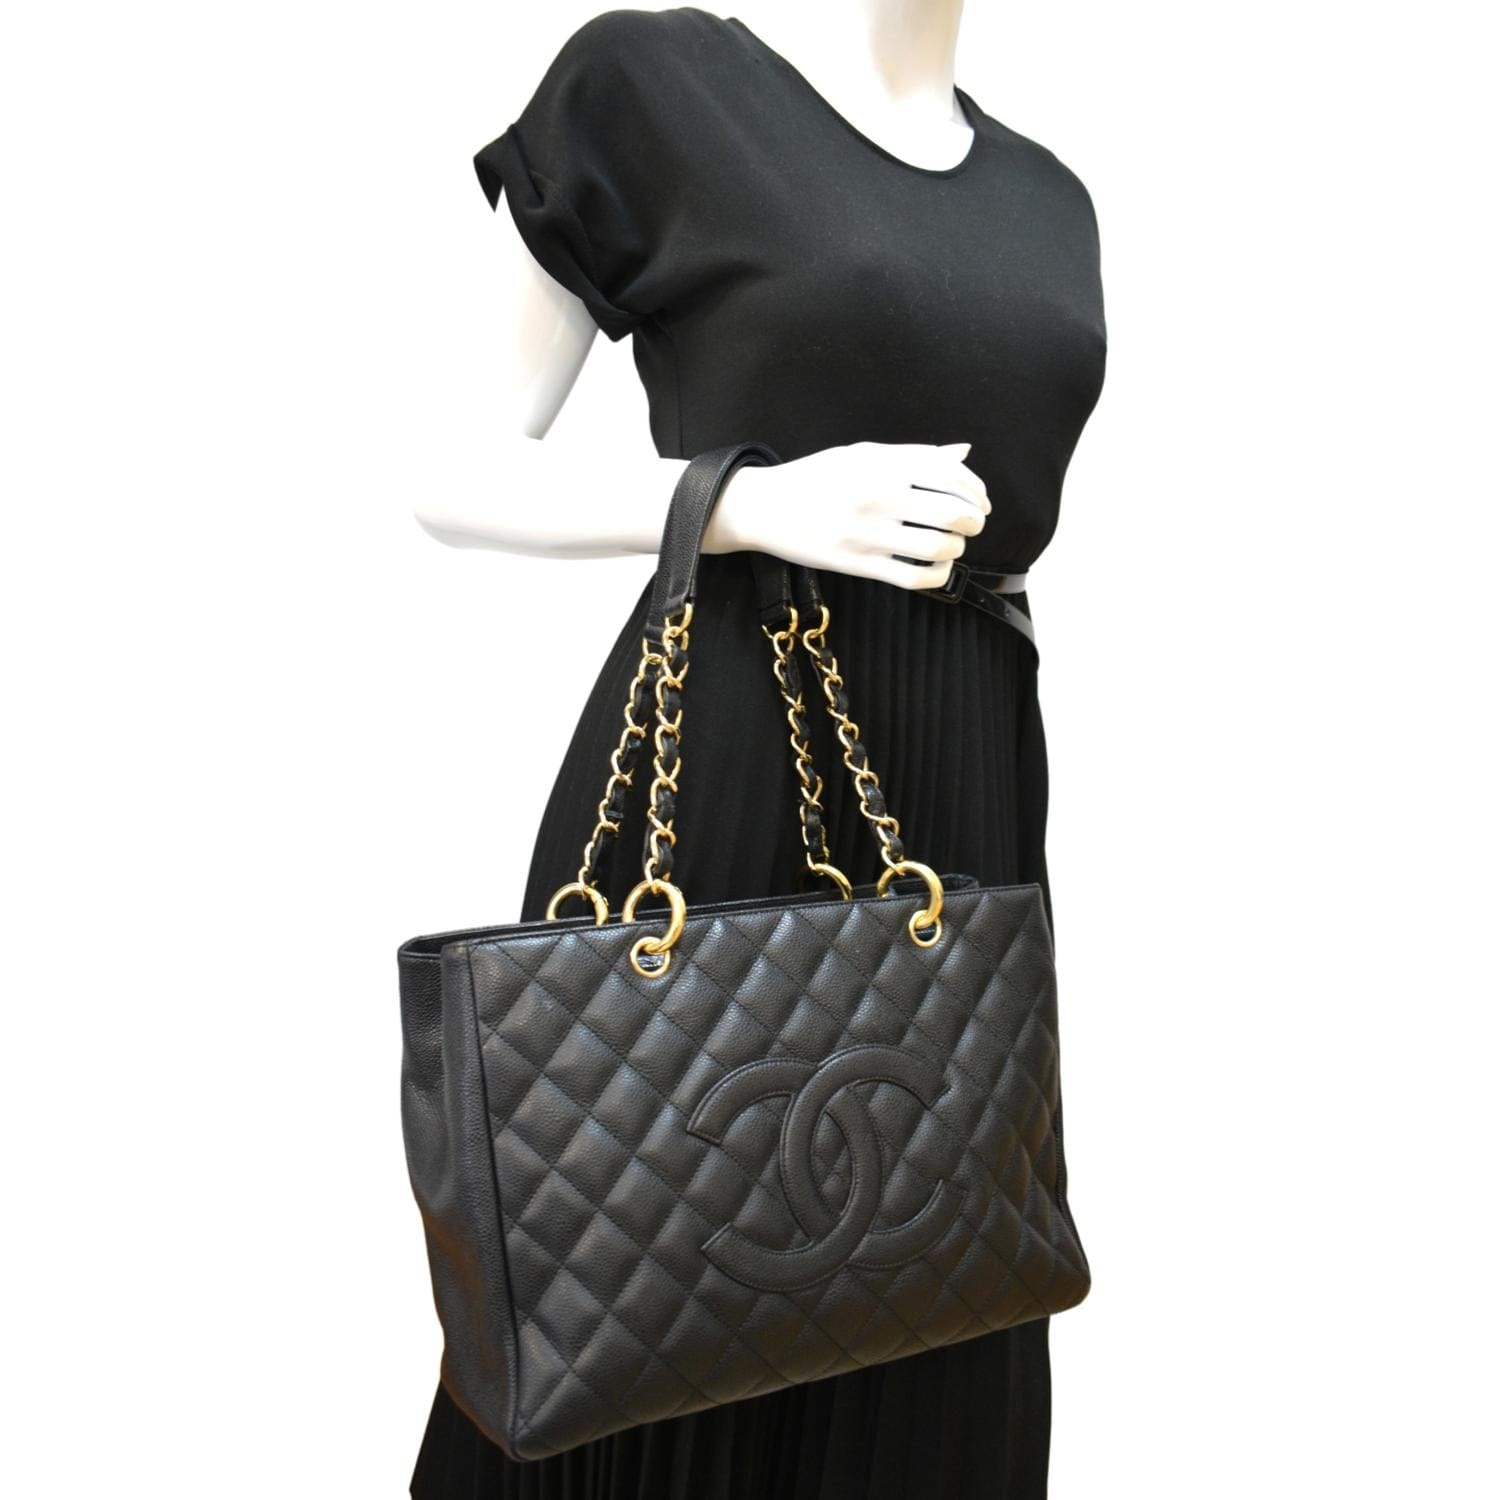 Chanel Pre-owned Women's Tote Bag - Black - One Size